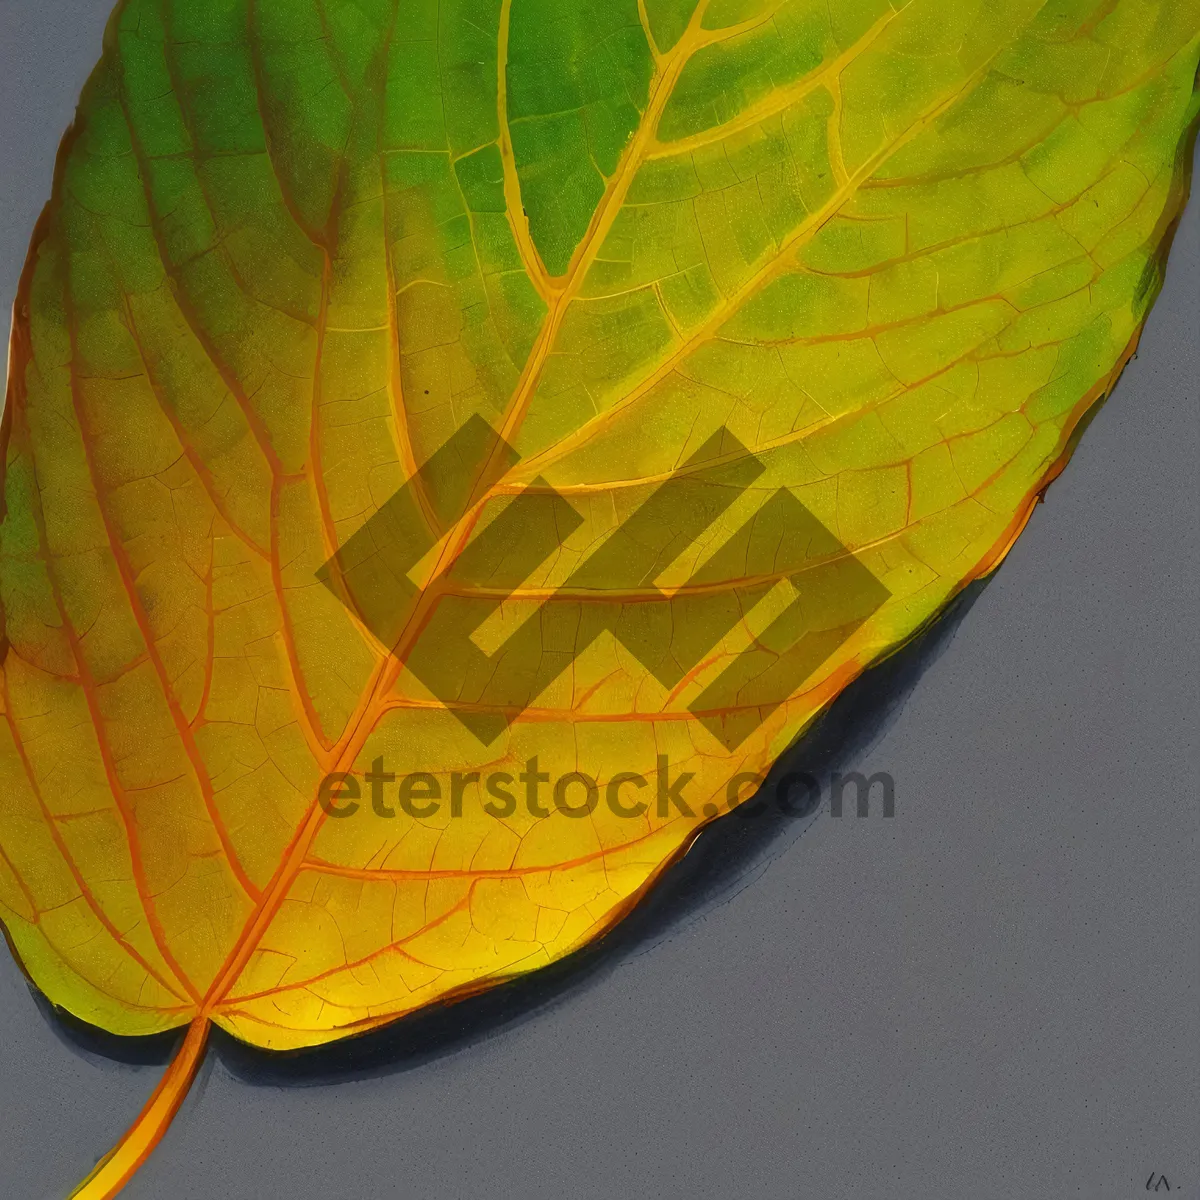 Picture of Autumn Foliage: Vibrant Color and Textured Leaves